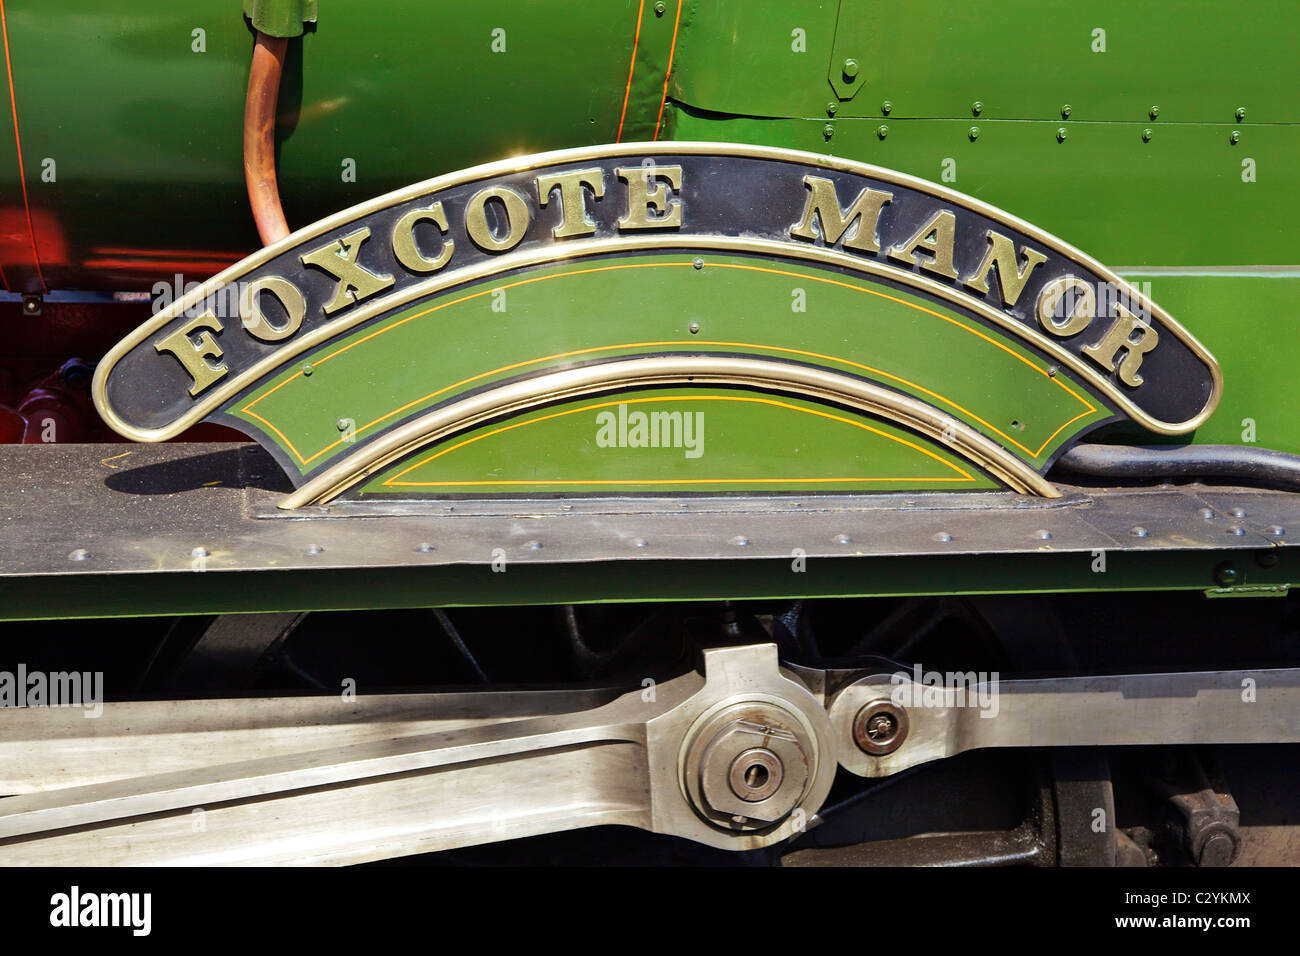 Great Western Railway 7822 Foxcote Manor is a 4-6-0 Manor Class locomotive, built in 1950 at Swindon Works. Stock Photo